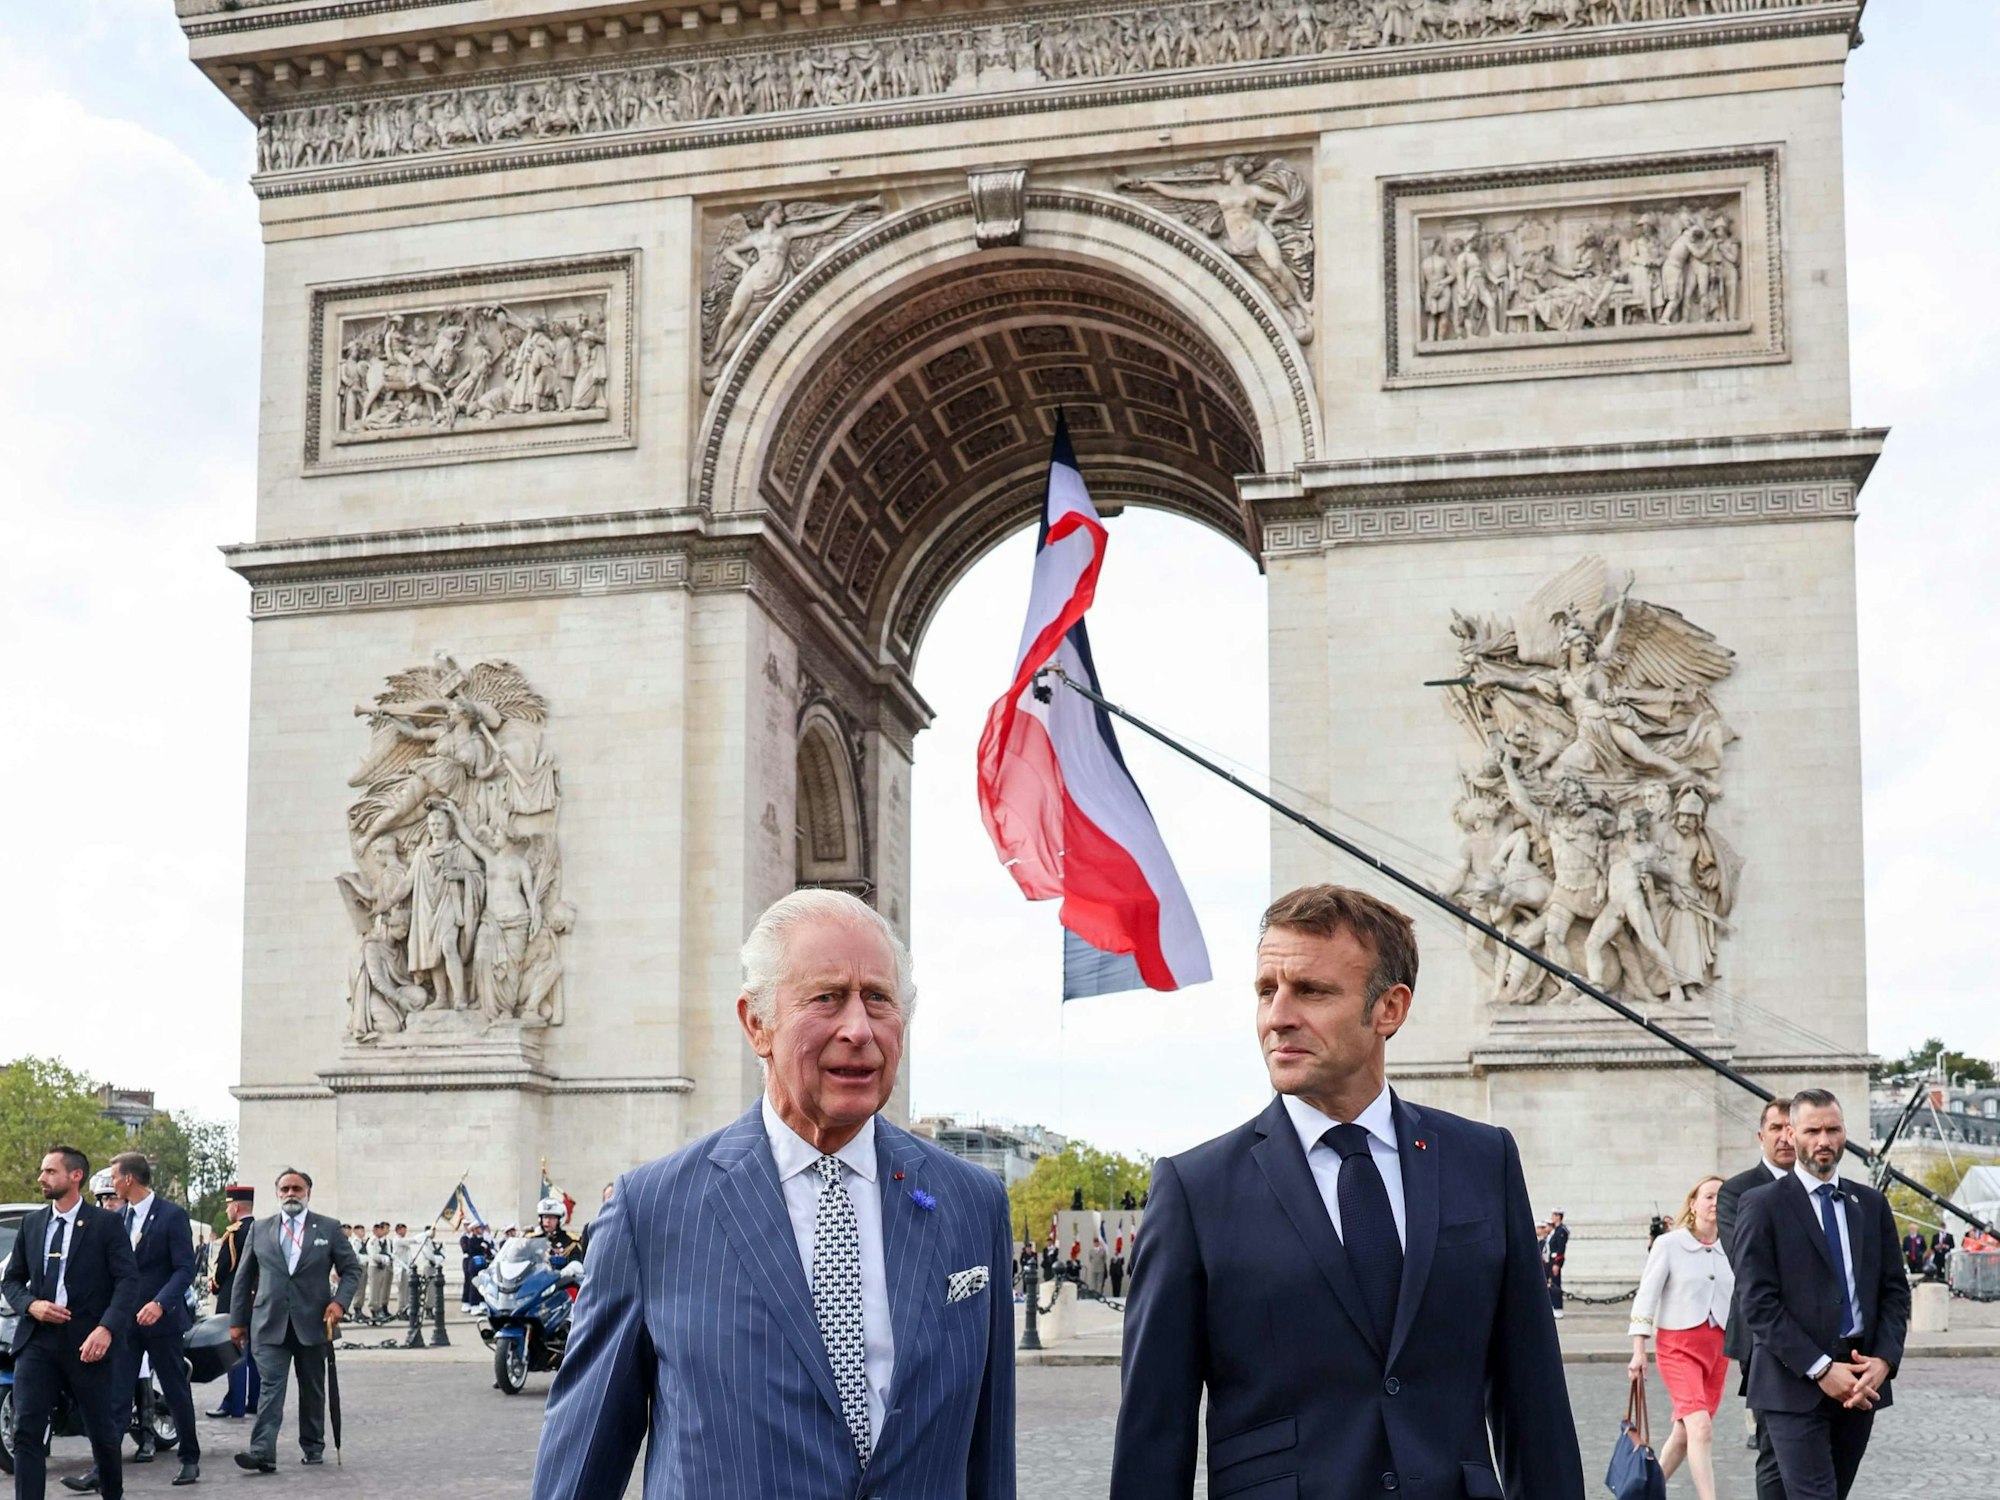 Britain's King Charles III (L) and French President Emmanuel Macron (R) depart the Arc de Triomphe after a wreath-laying ceremony at the Tomb of the Unknown Soldier in Paris on September 20, 2023, on the first day of a state visit to France. Britain's King Charles III and his wife Queen Camilla are on a three-day state visit to France. (Photo by Chris Jackson / POOL / AFP)